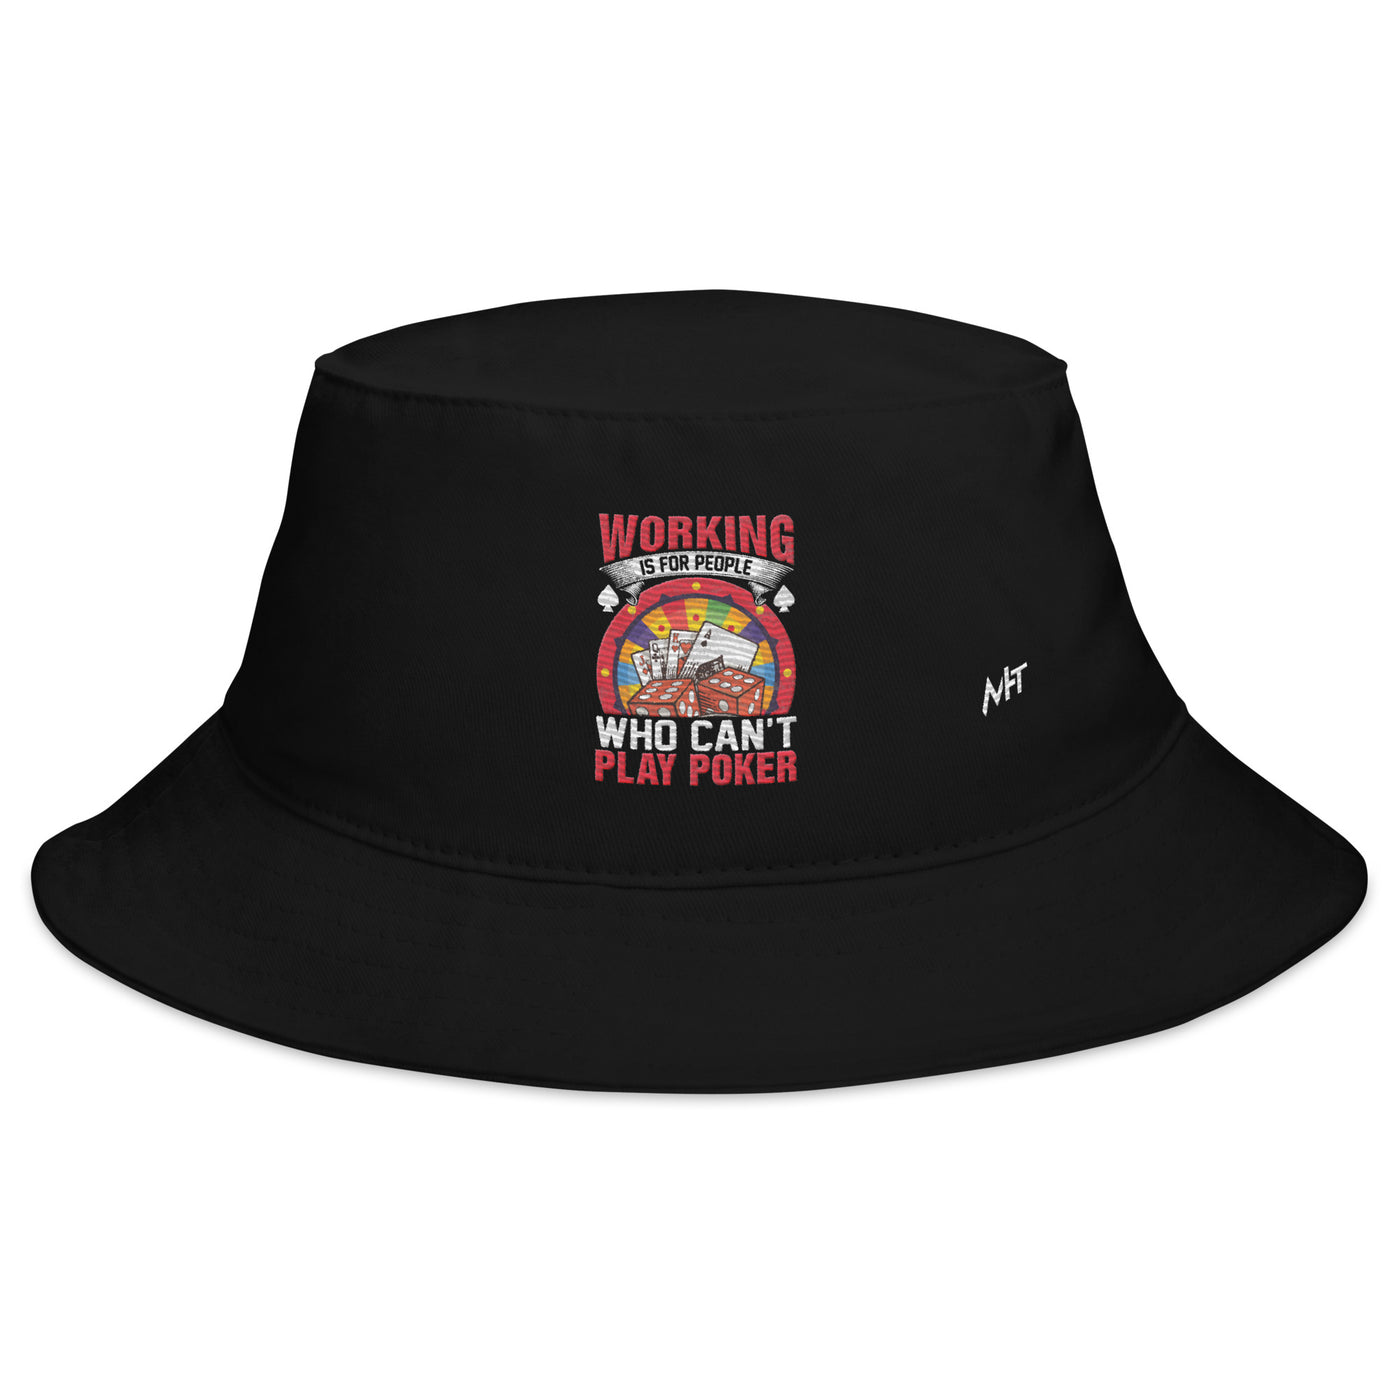 Working is for people for Who can't Play Poker - Bucket Hat